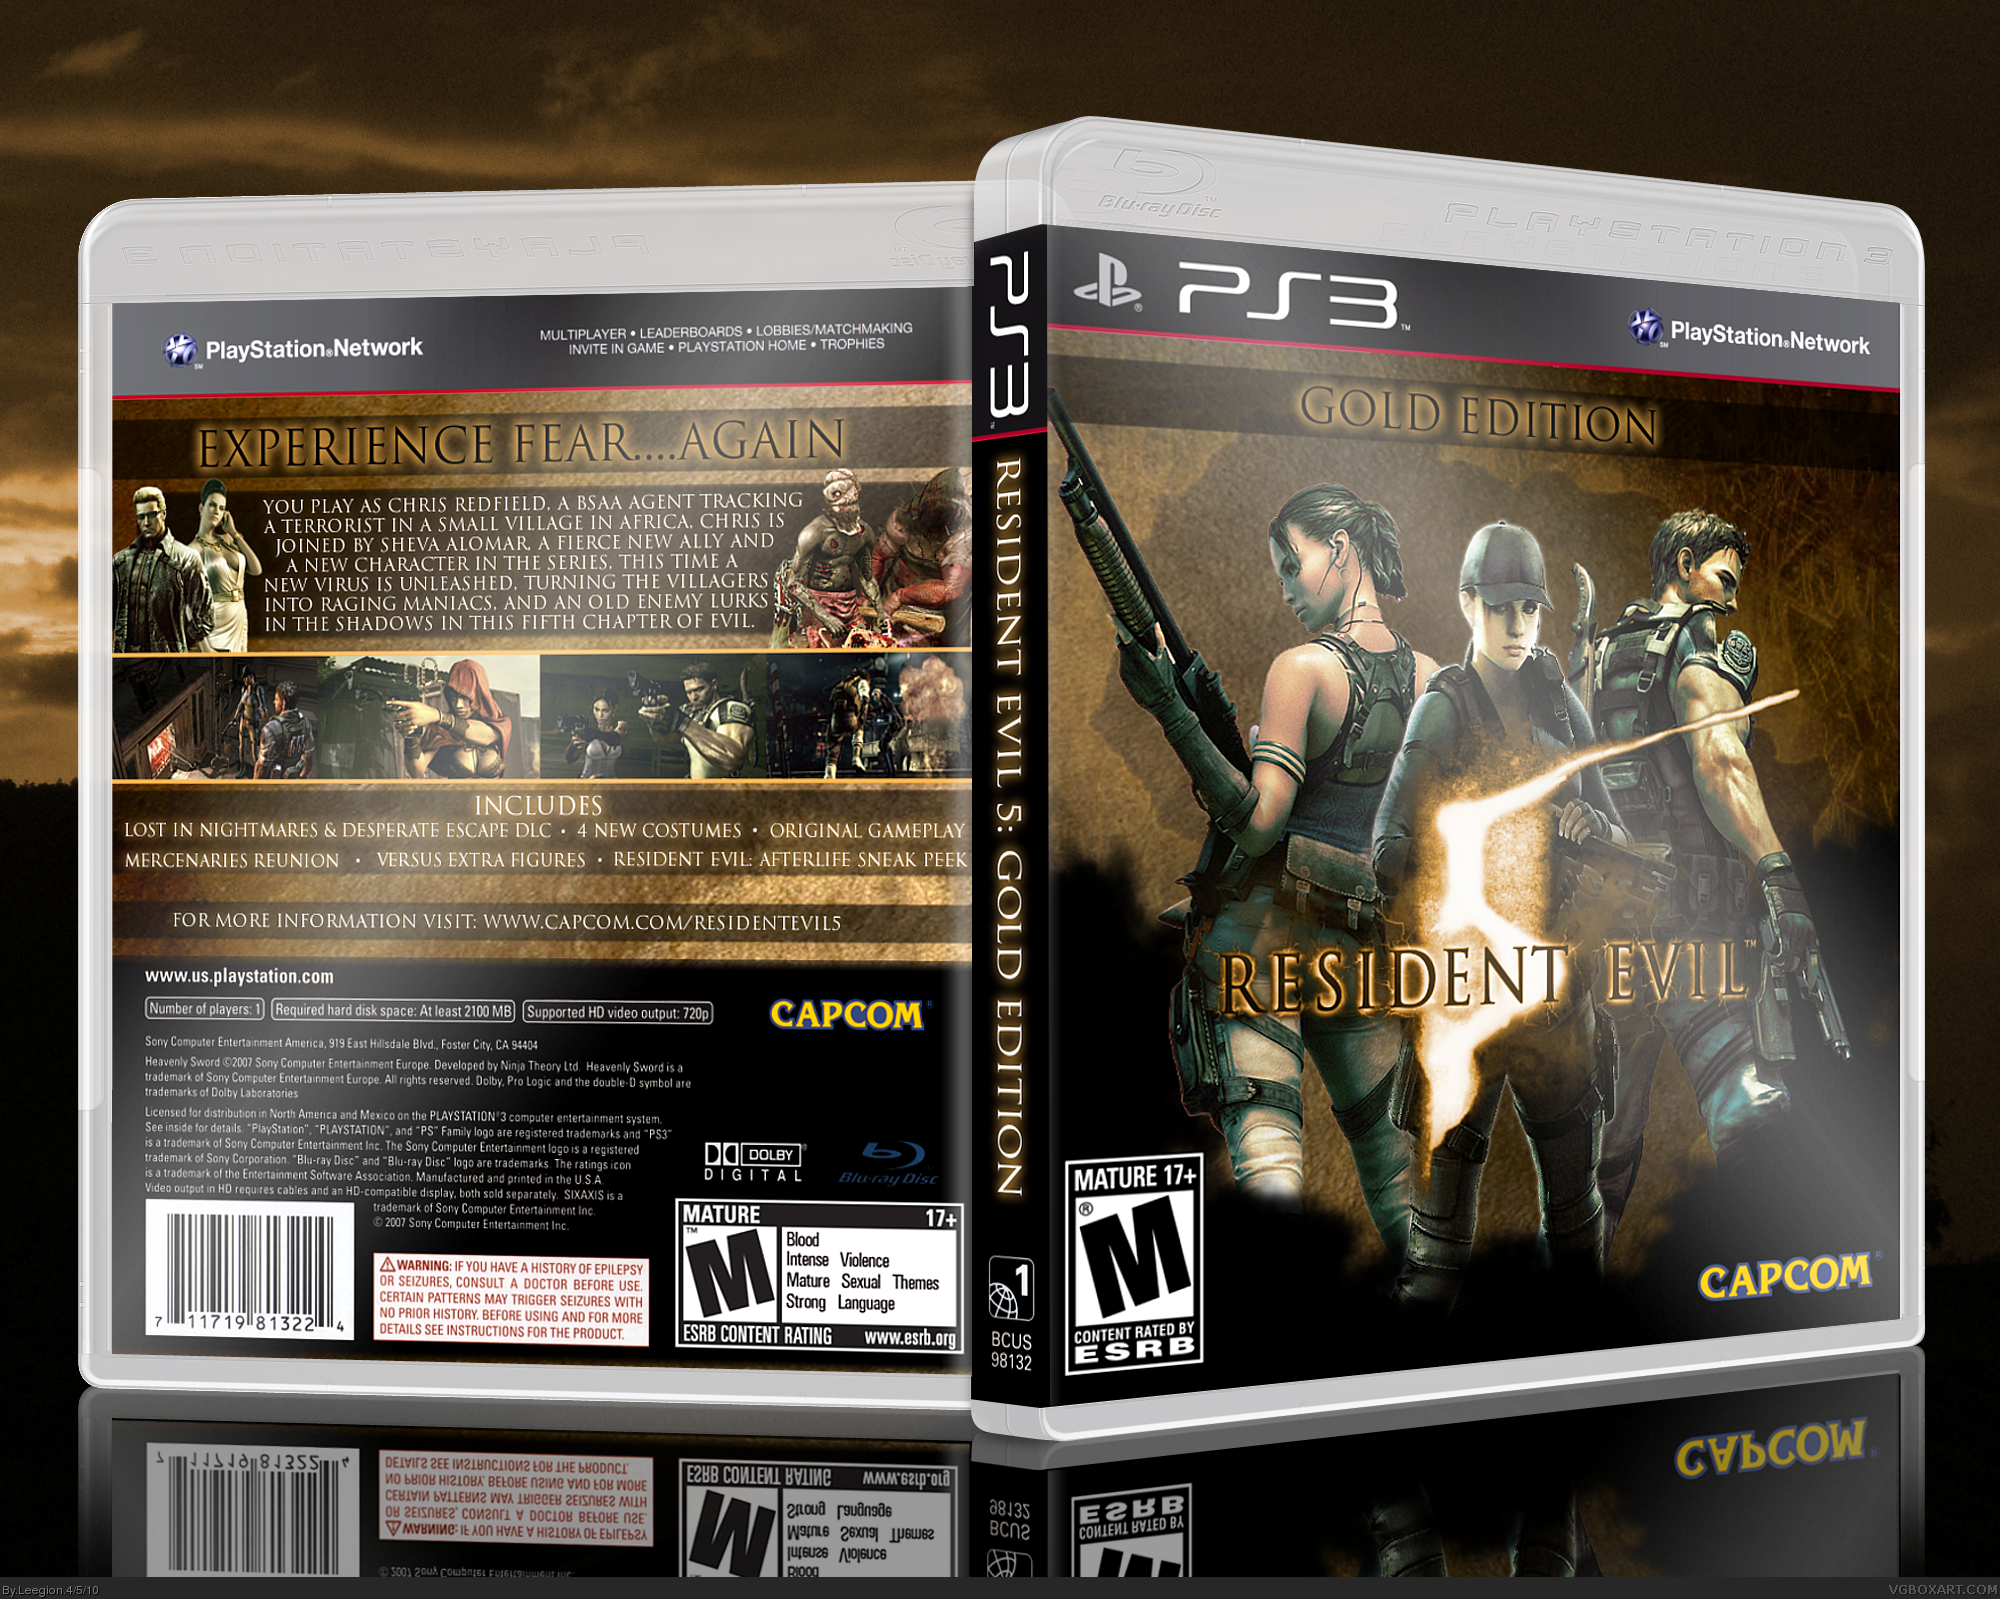 Resident evil 5 ps. Resident Evil 5 Gold Edition ps3. Диск Resident Evil Gold Edition. Resident Evil 5 ps3 обложка. Resident Evil 5 Gold Edition ps3 Disc.